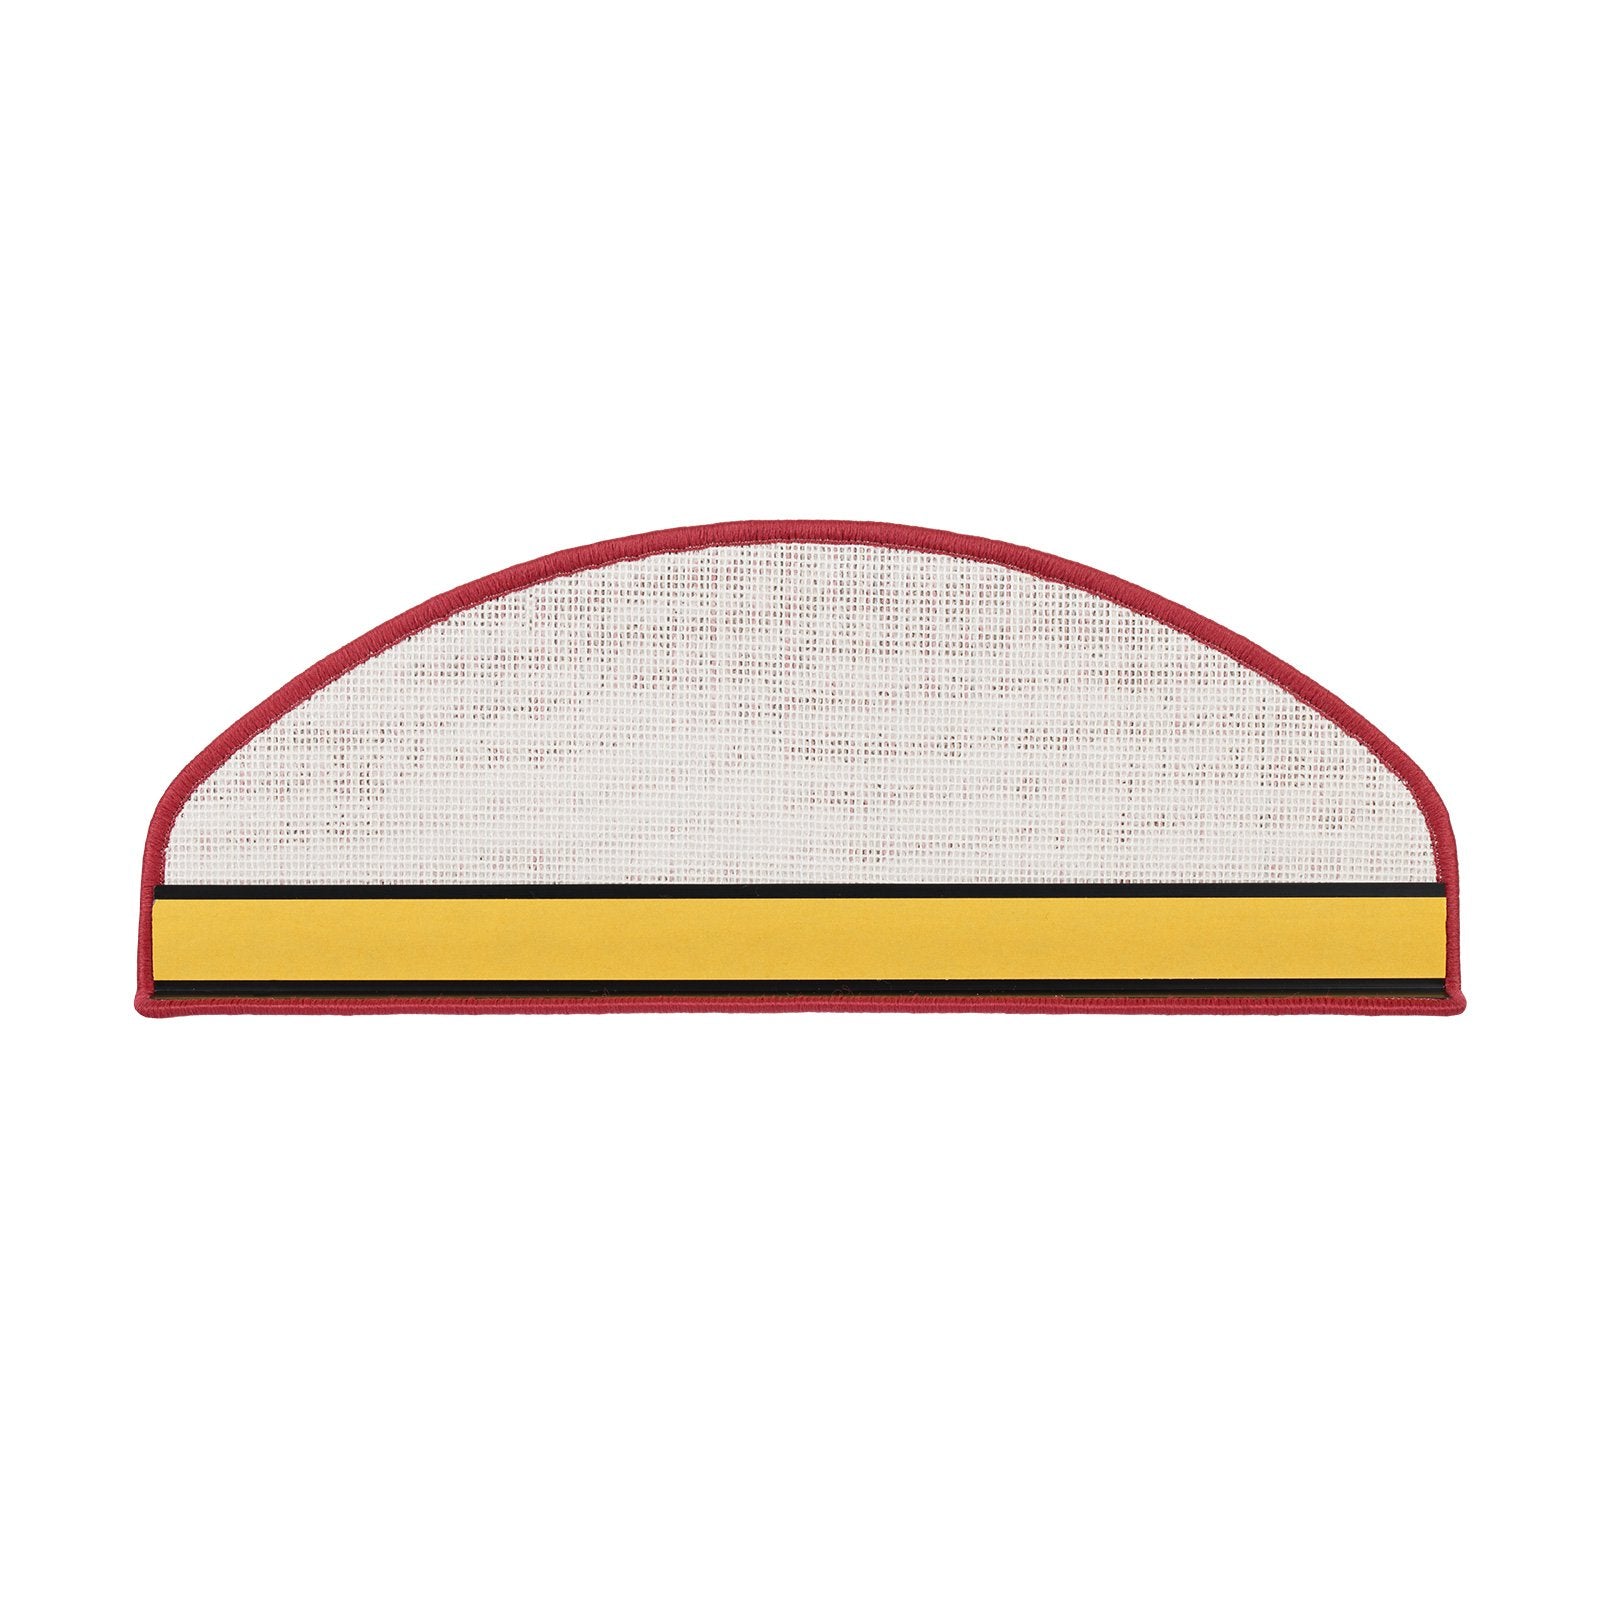 F2_fd-18510,fd-29022 | Rouge | Semicirculaire